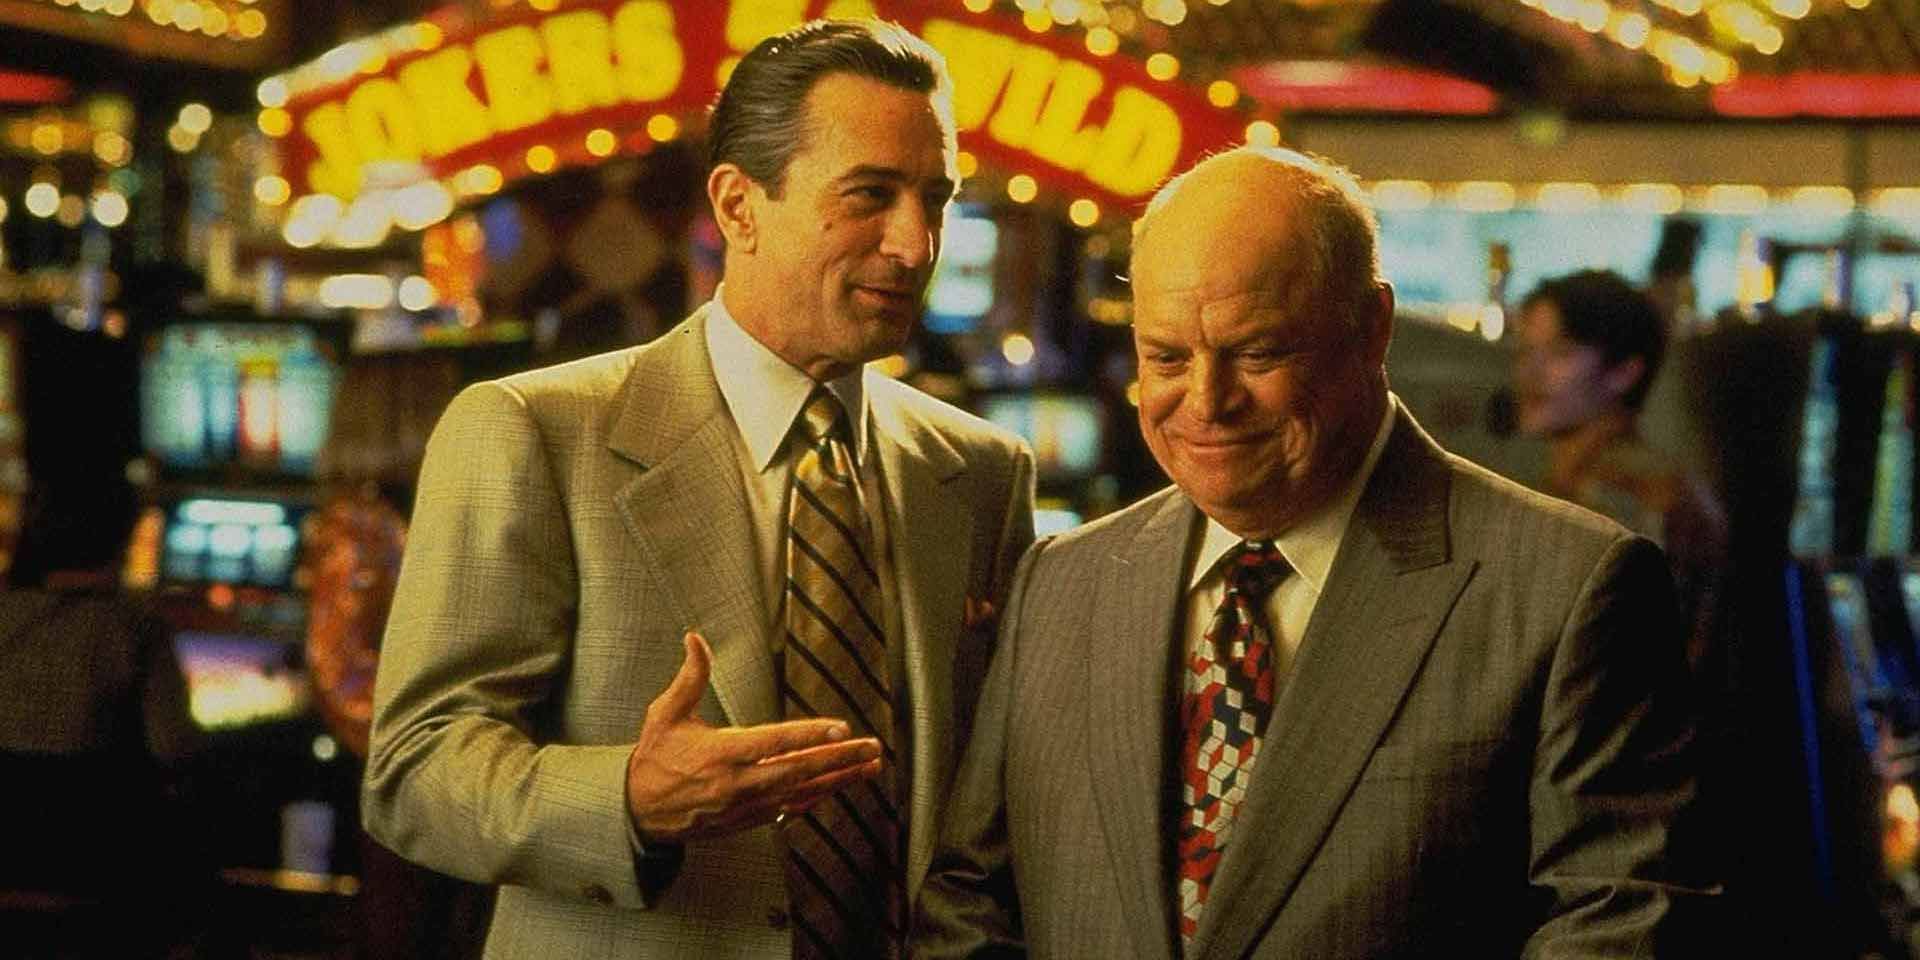 Robert DeNiro and Don Rickles stand together in Casino